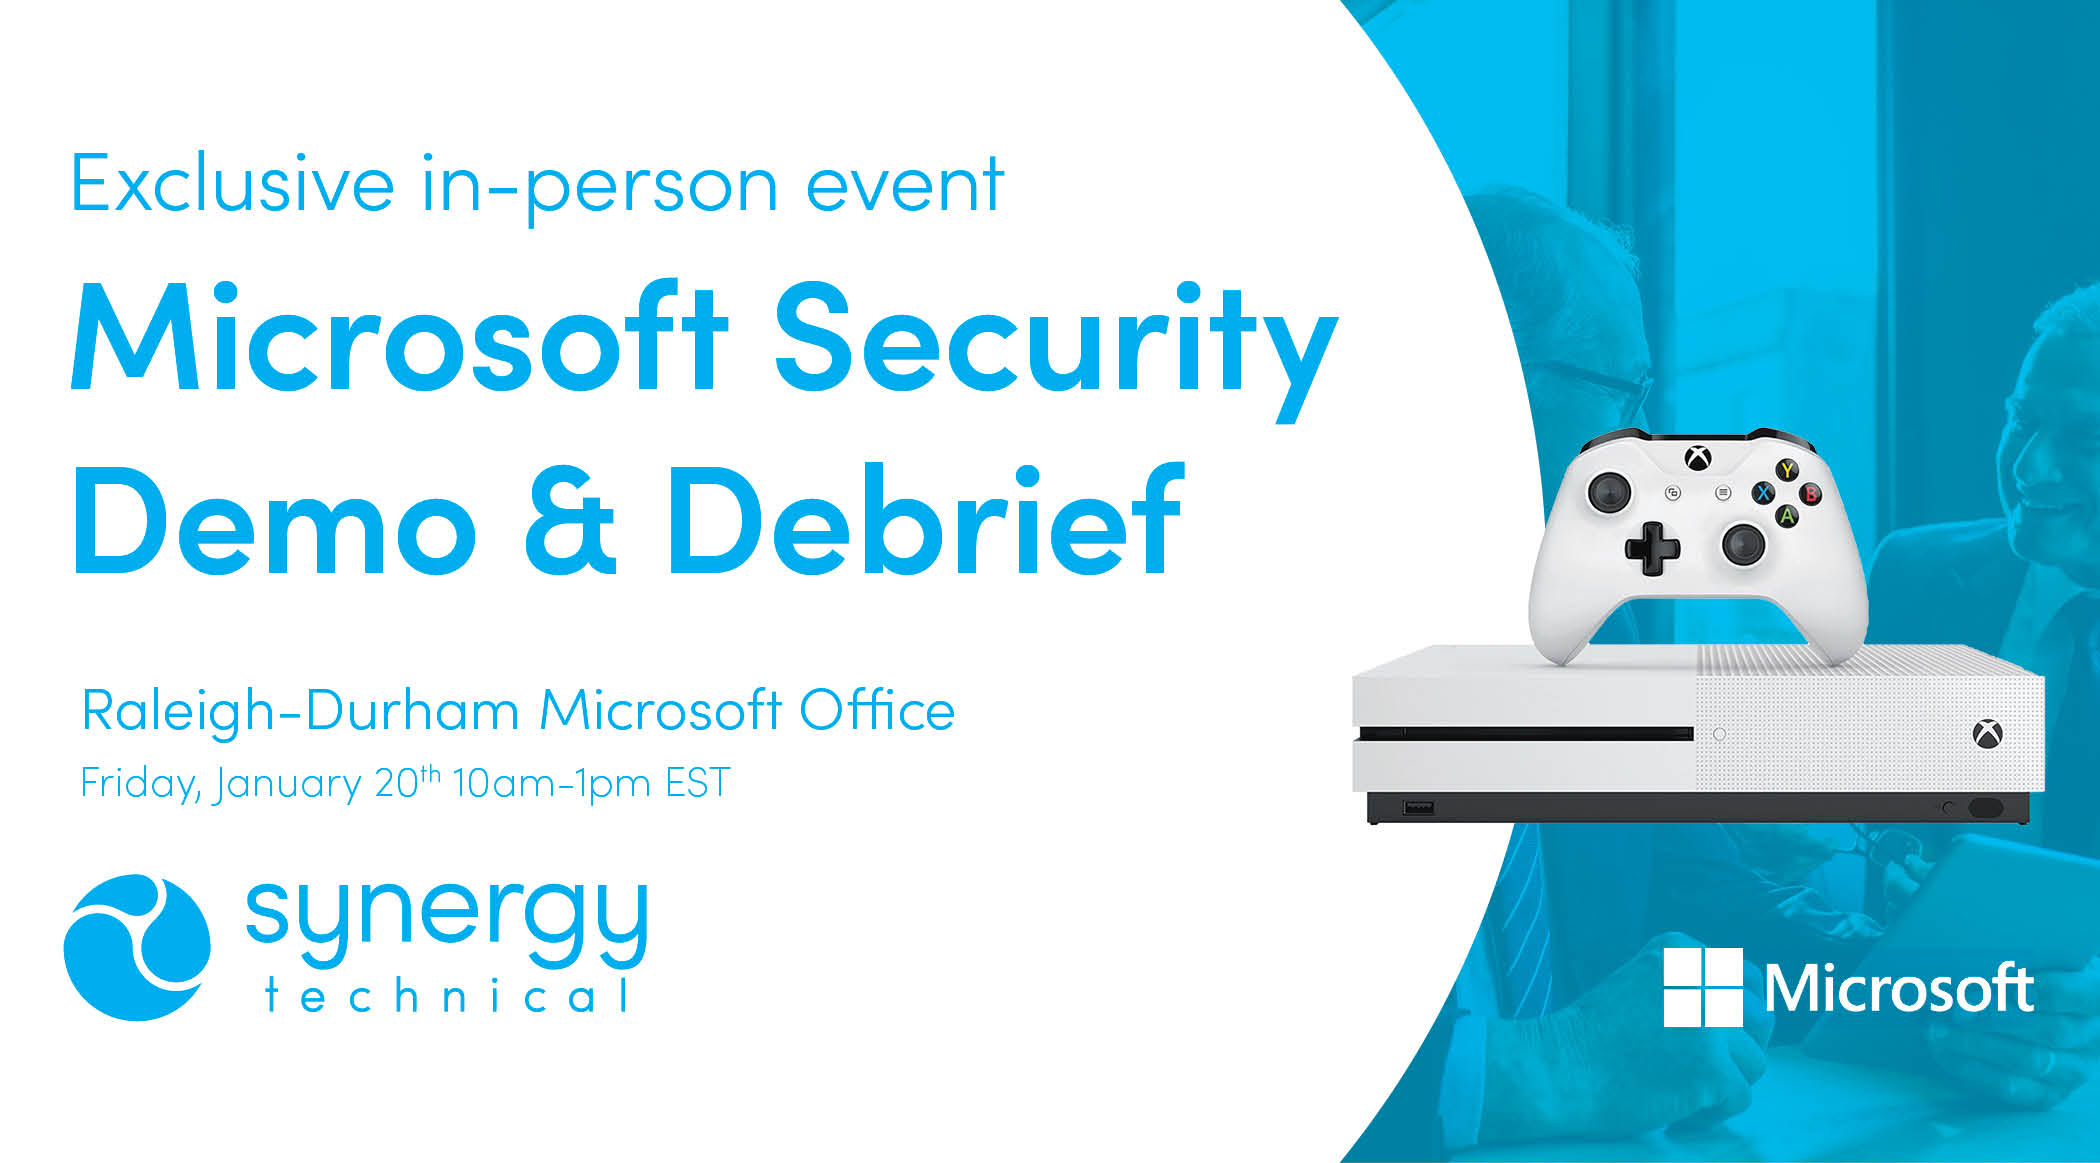 Microsoft Security Debrief and Immersion Experience  Morrisville  NC  